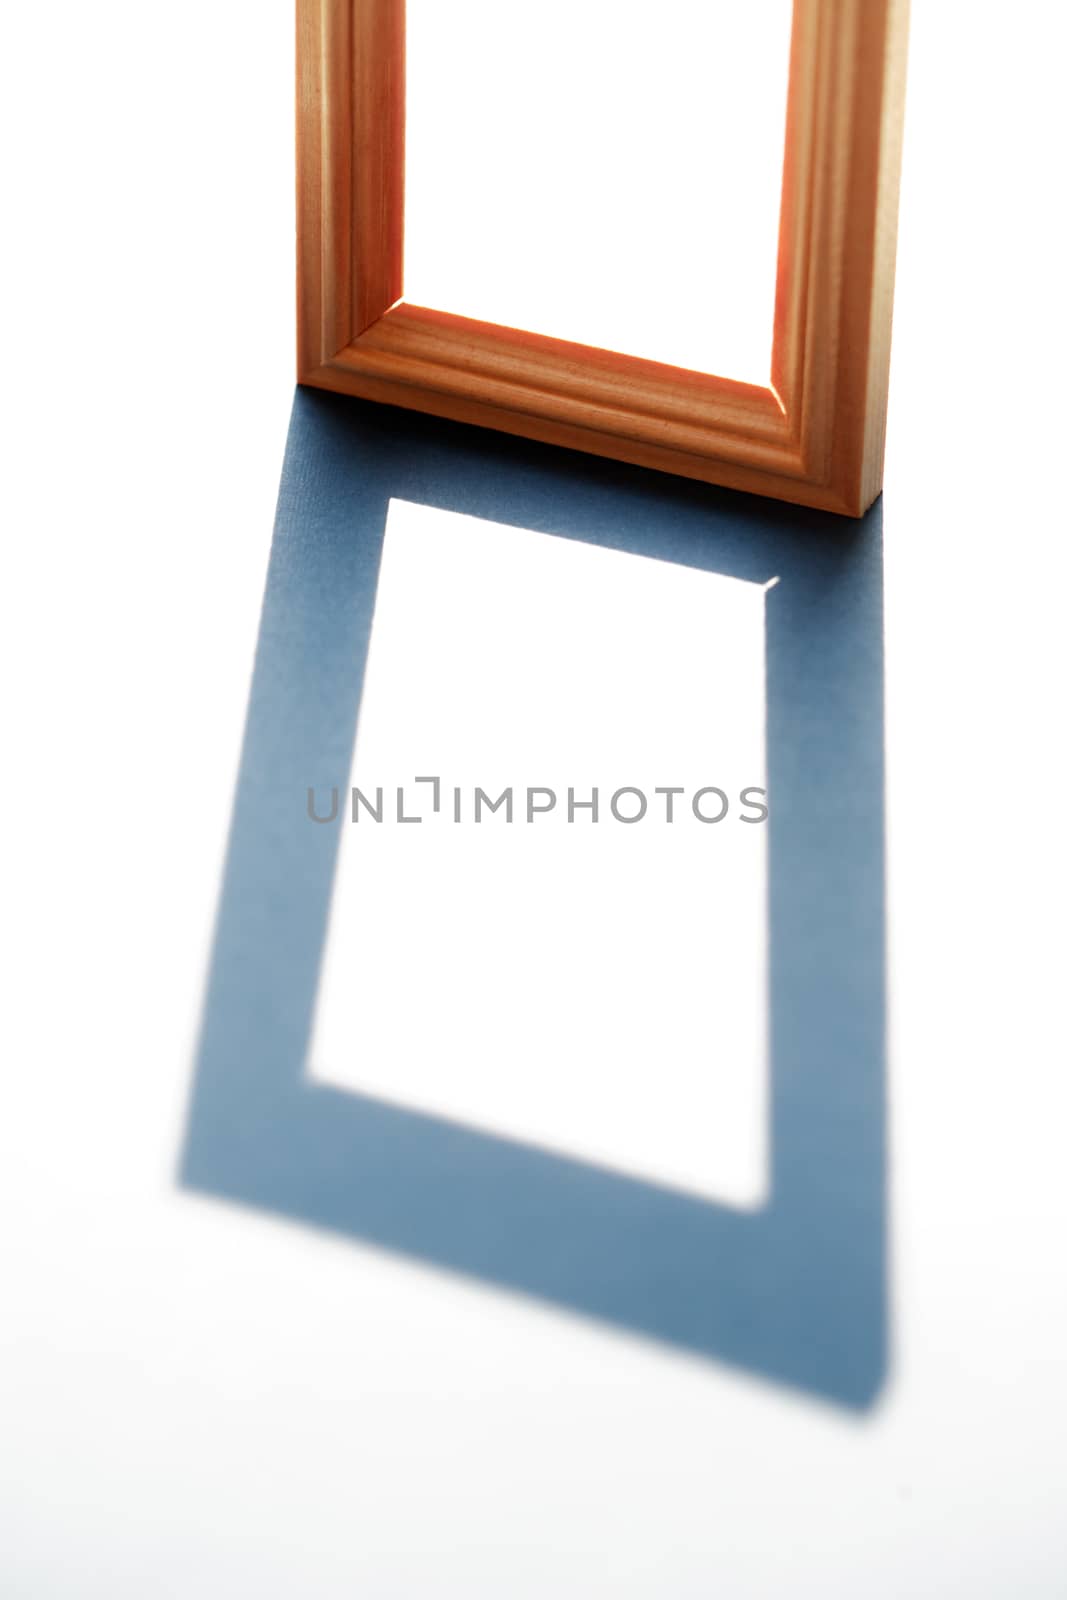 Wooden Frame With Shadow by kvkirillov